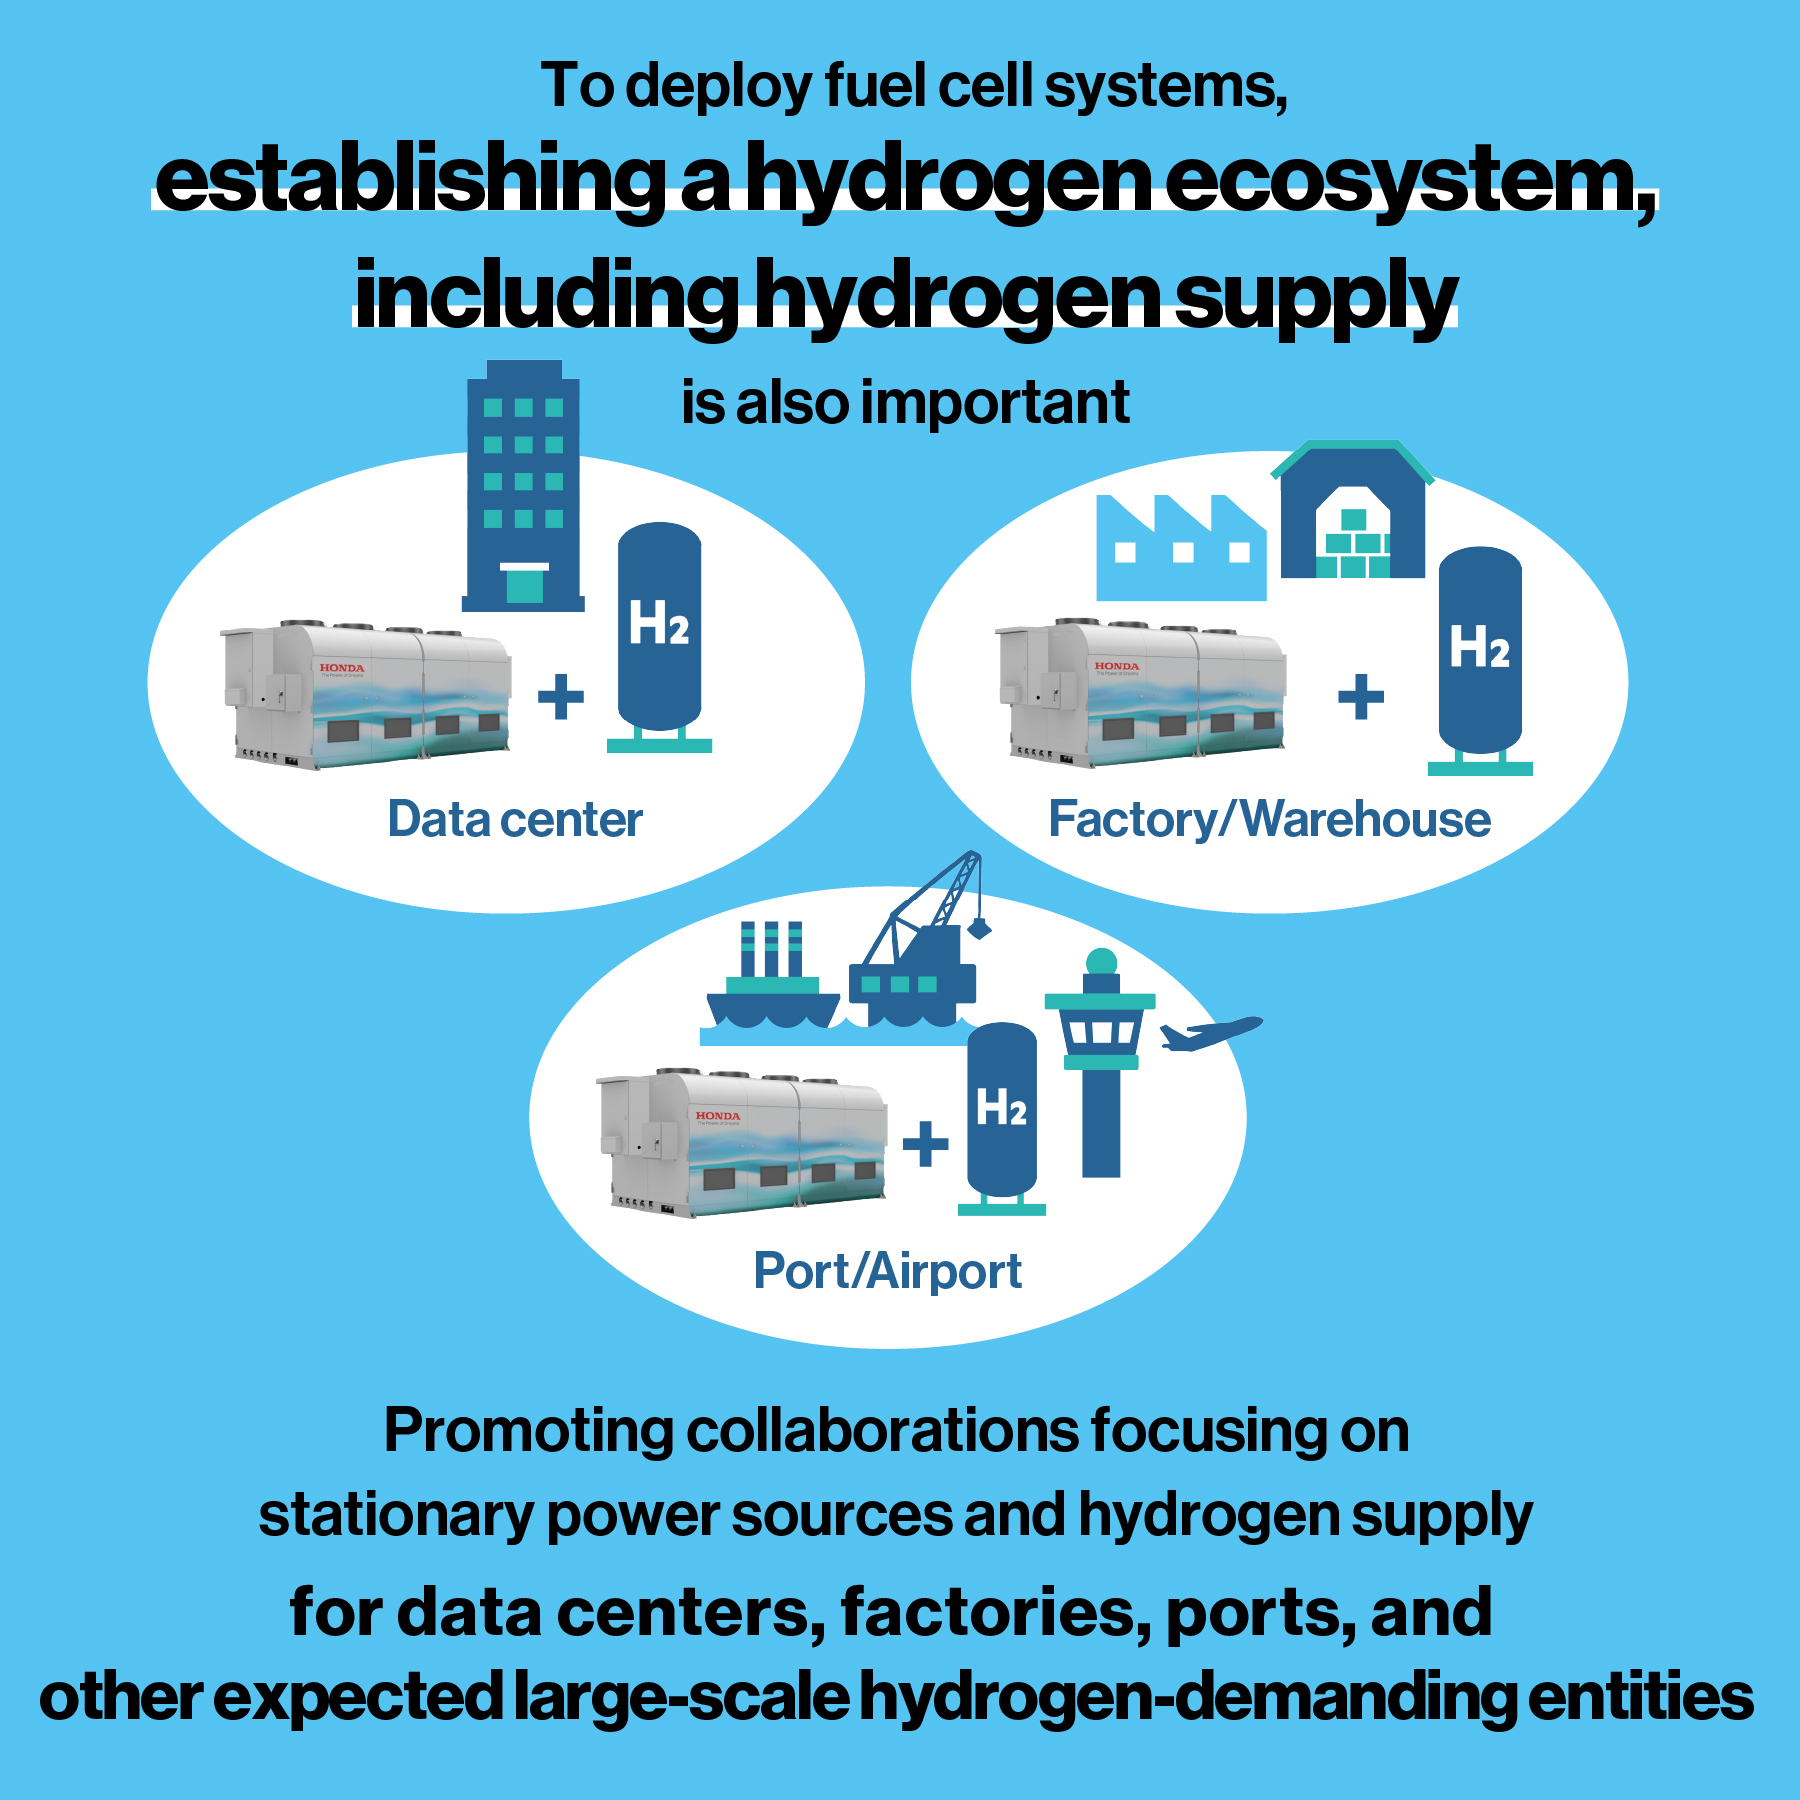 For the deployment of fuel cell systems, it is crucial to establish a hydrogen ecosystem